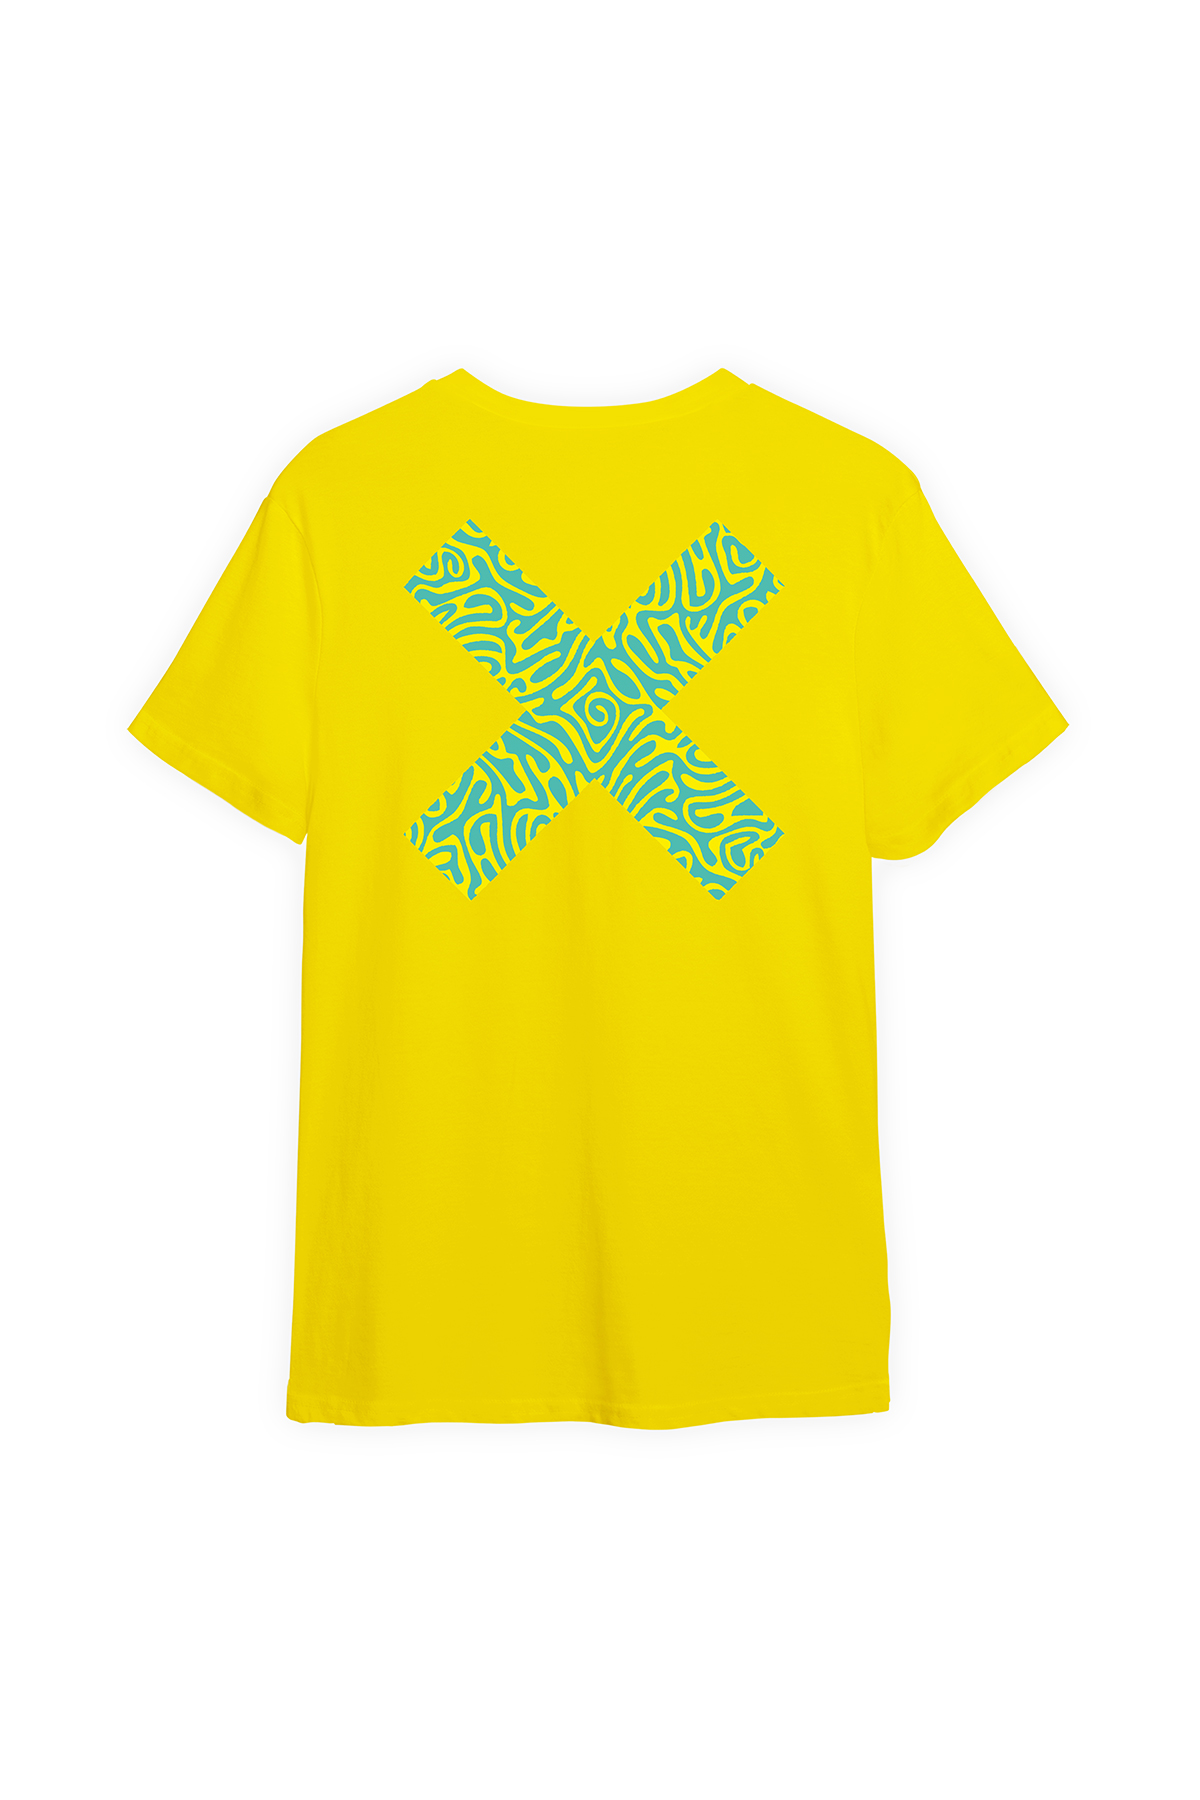 Unisex-Time-Out-X-Signature-Pure-Cotton-Yellow-Print-T-shirt-for-Kids—Front